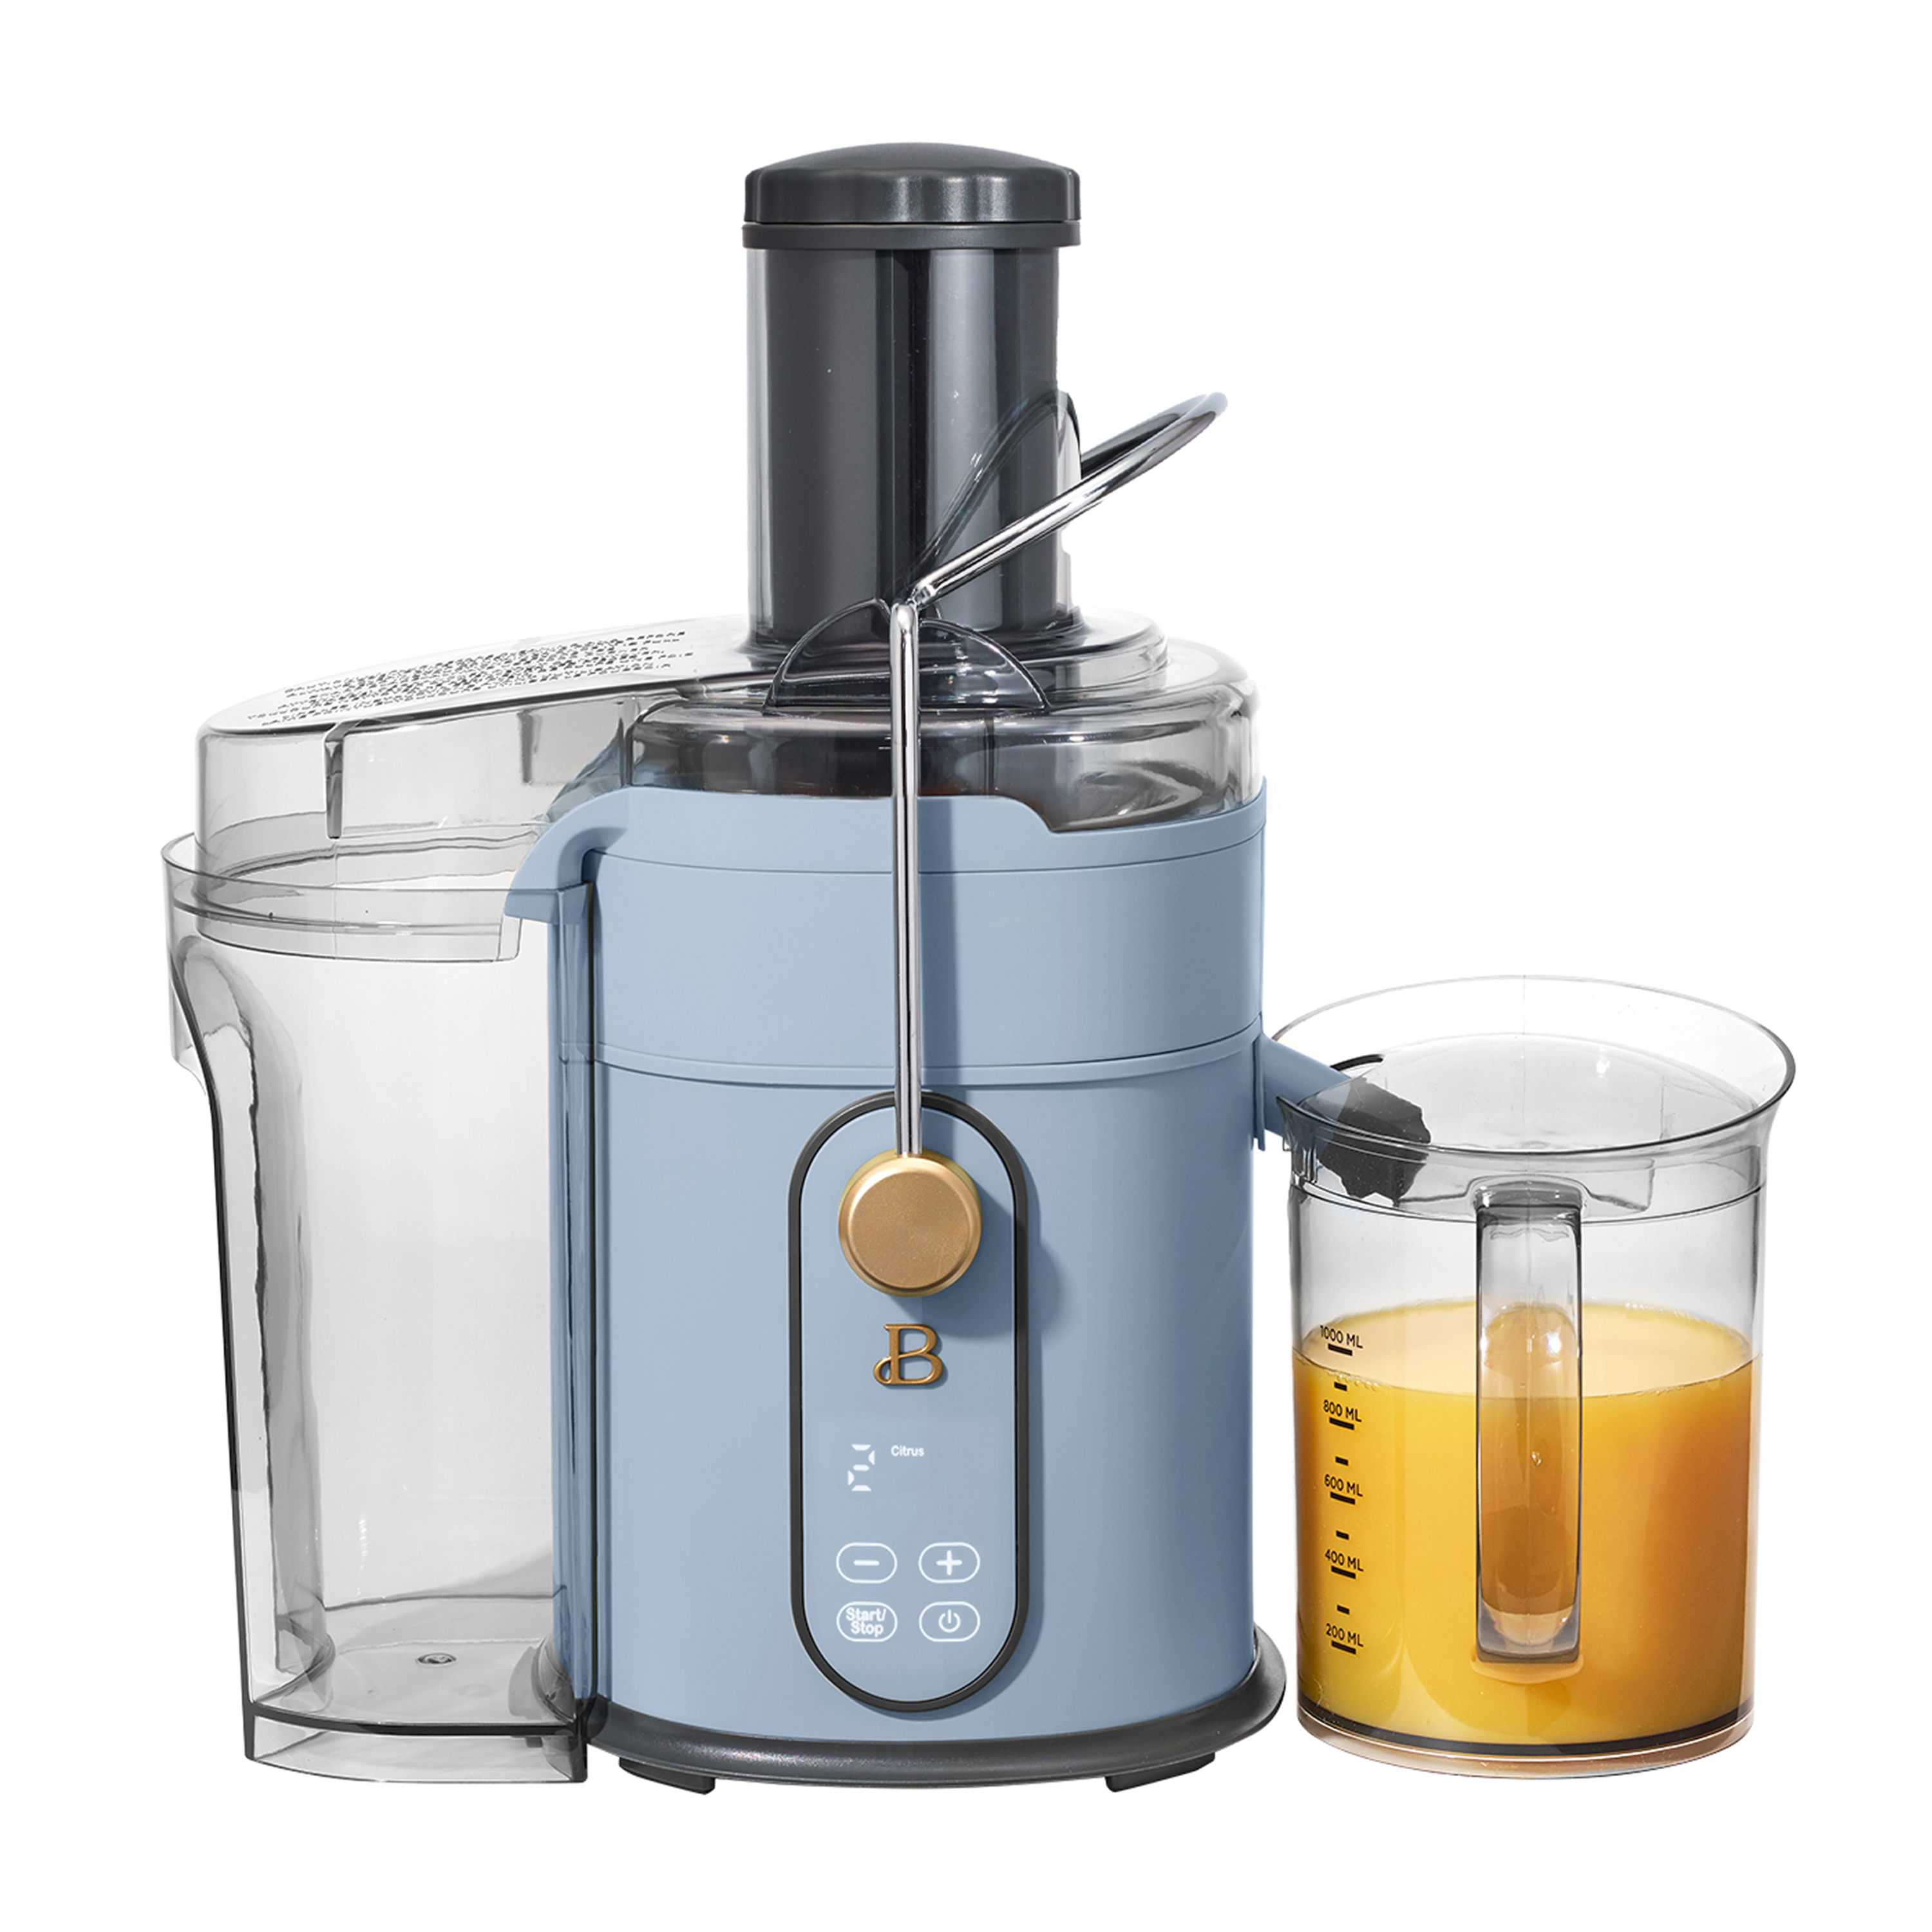 Beautiful 5-Speed 1000W Electric Juice Extractor with Touch Activated Display, Cornflower Blue by Drew Barrymore - image 1 of 11